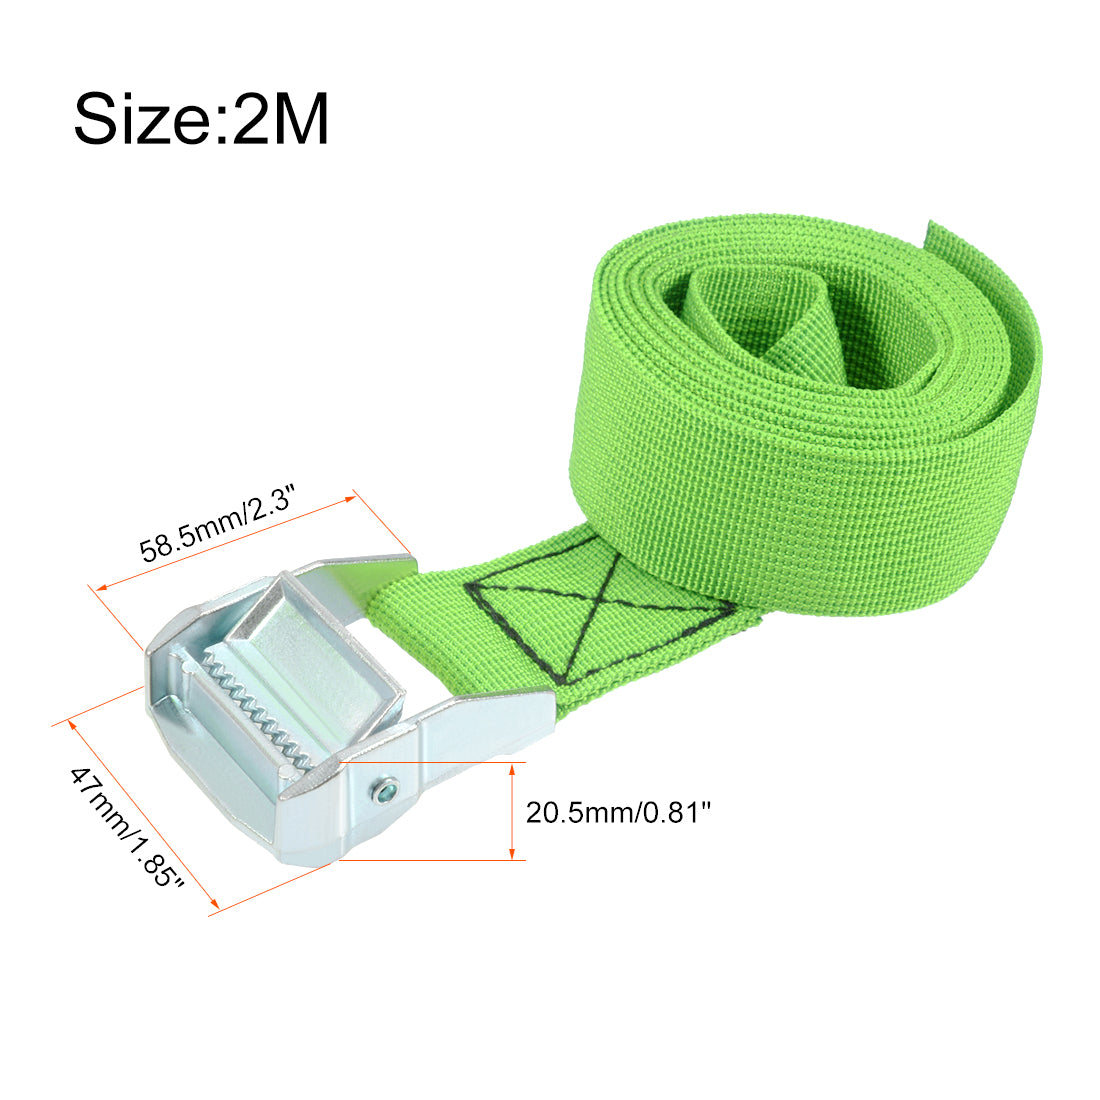 uxcell Uxcell 2Mx38mm Lashing Strap Cargo Tie Down Straps w Cam Lock Buckle 500Kg Work Load, Green, 2Pcs